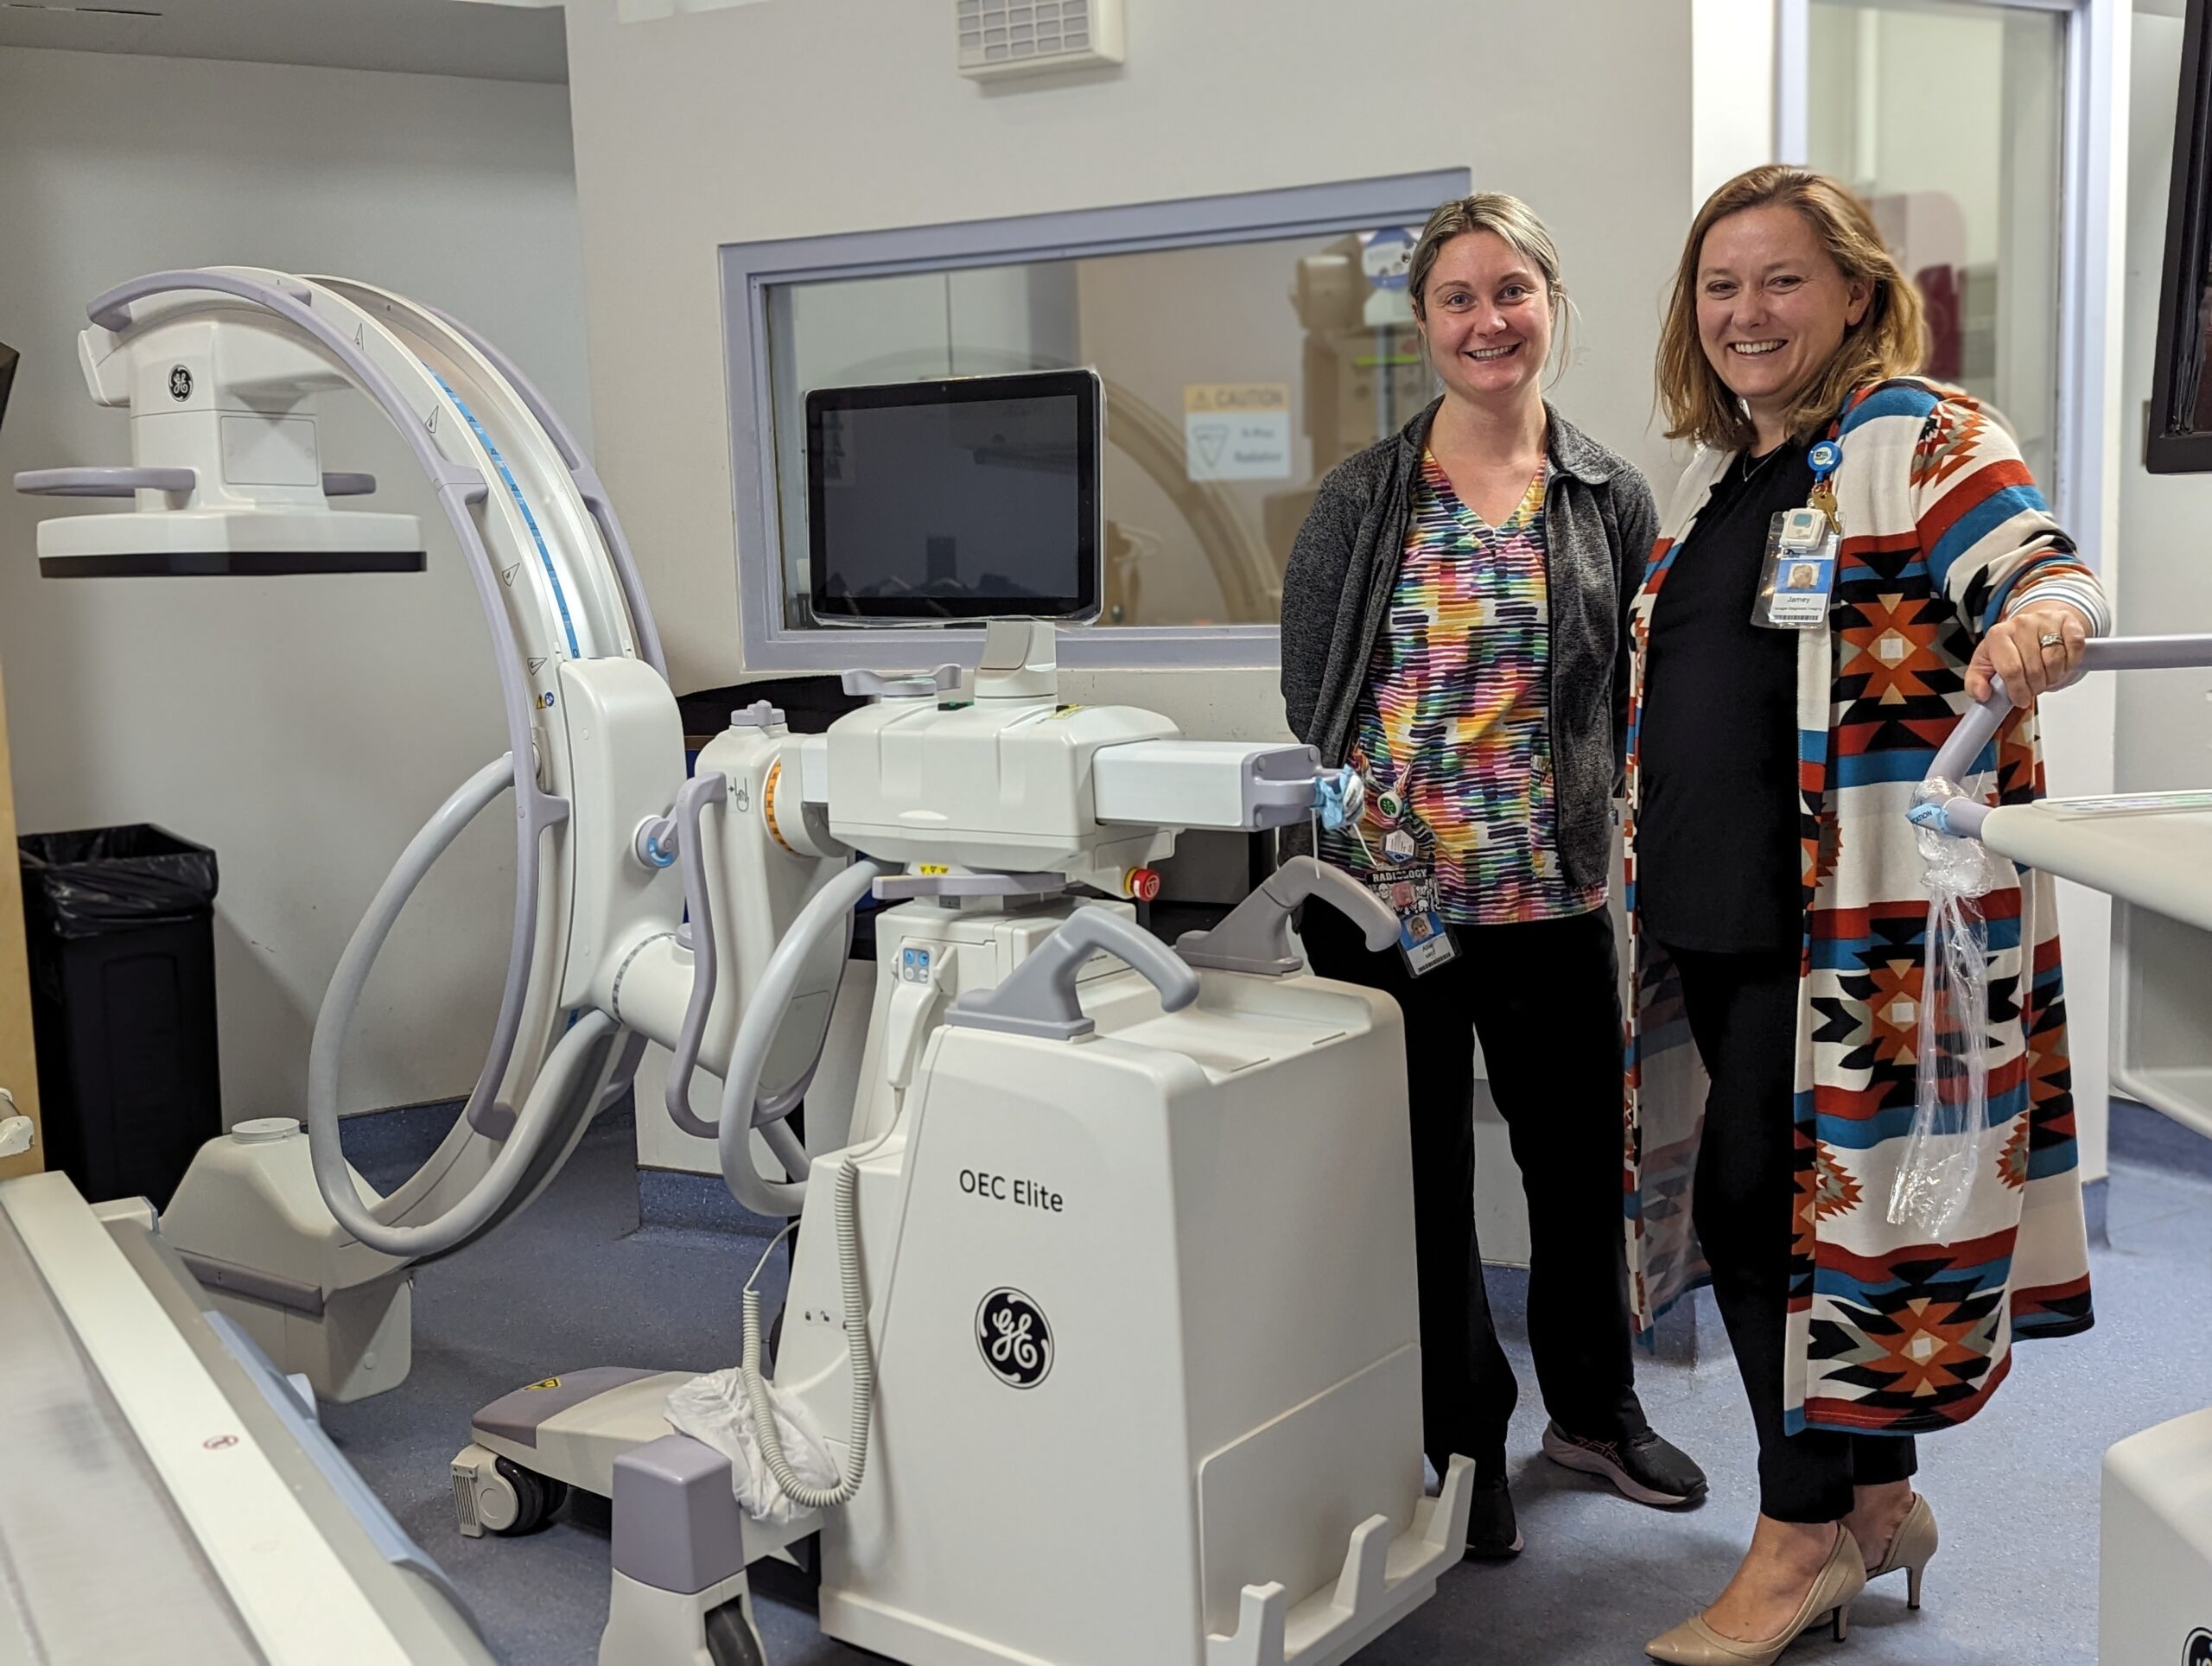 Unprecedented times calls for unprecedented measures: A diagnostic imaging department outfitted for the needs of South Georgian Bay